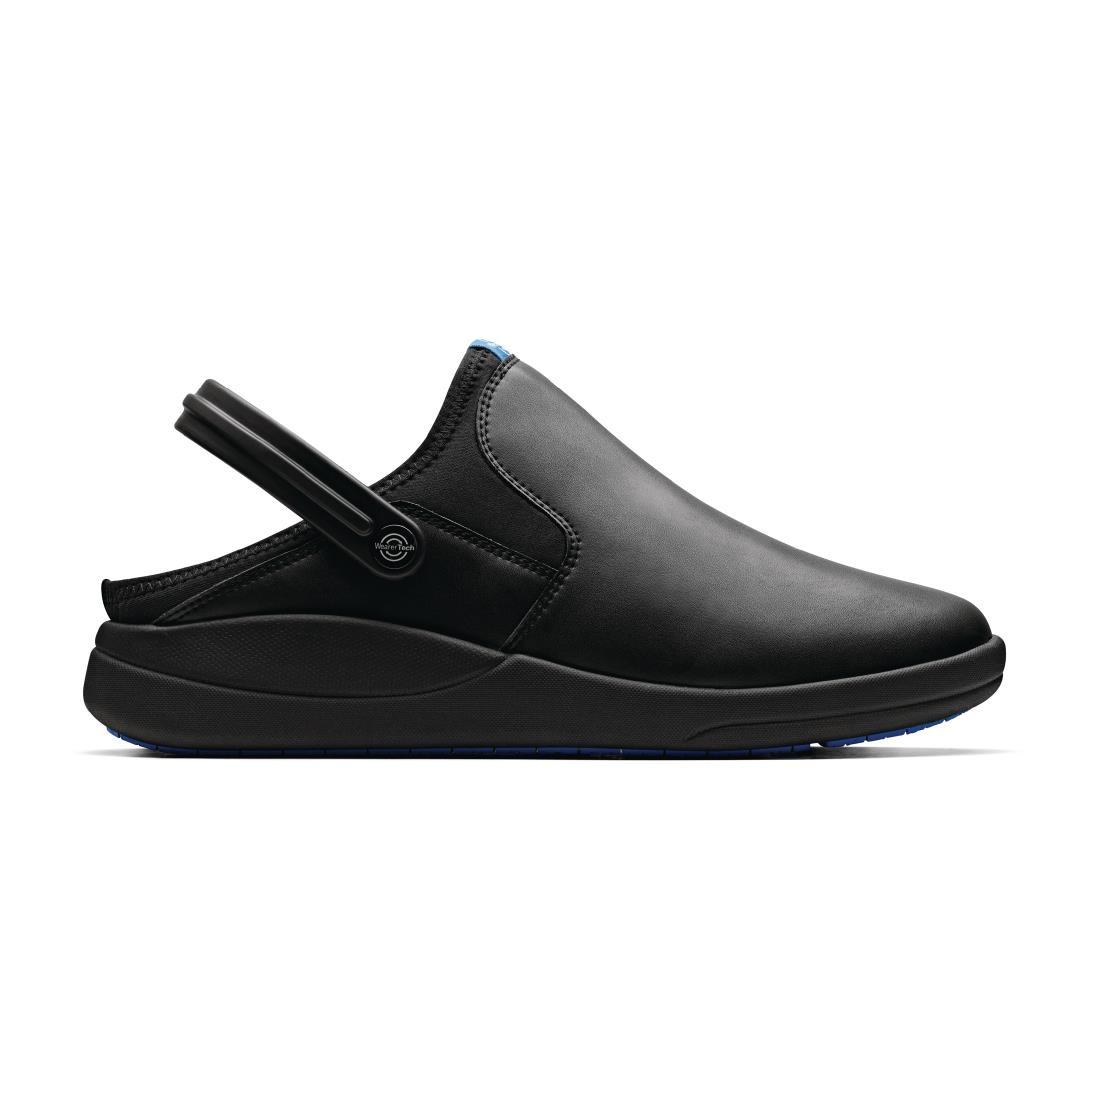 WearerTech Refresh Clog Black with Firm Insoles Size 43 - BB556-9  - 3